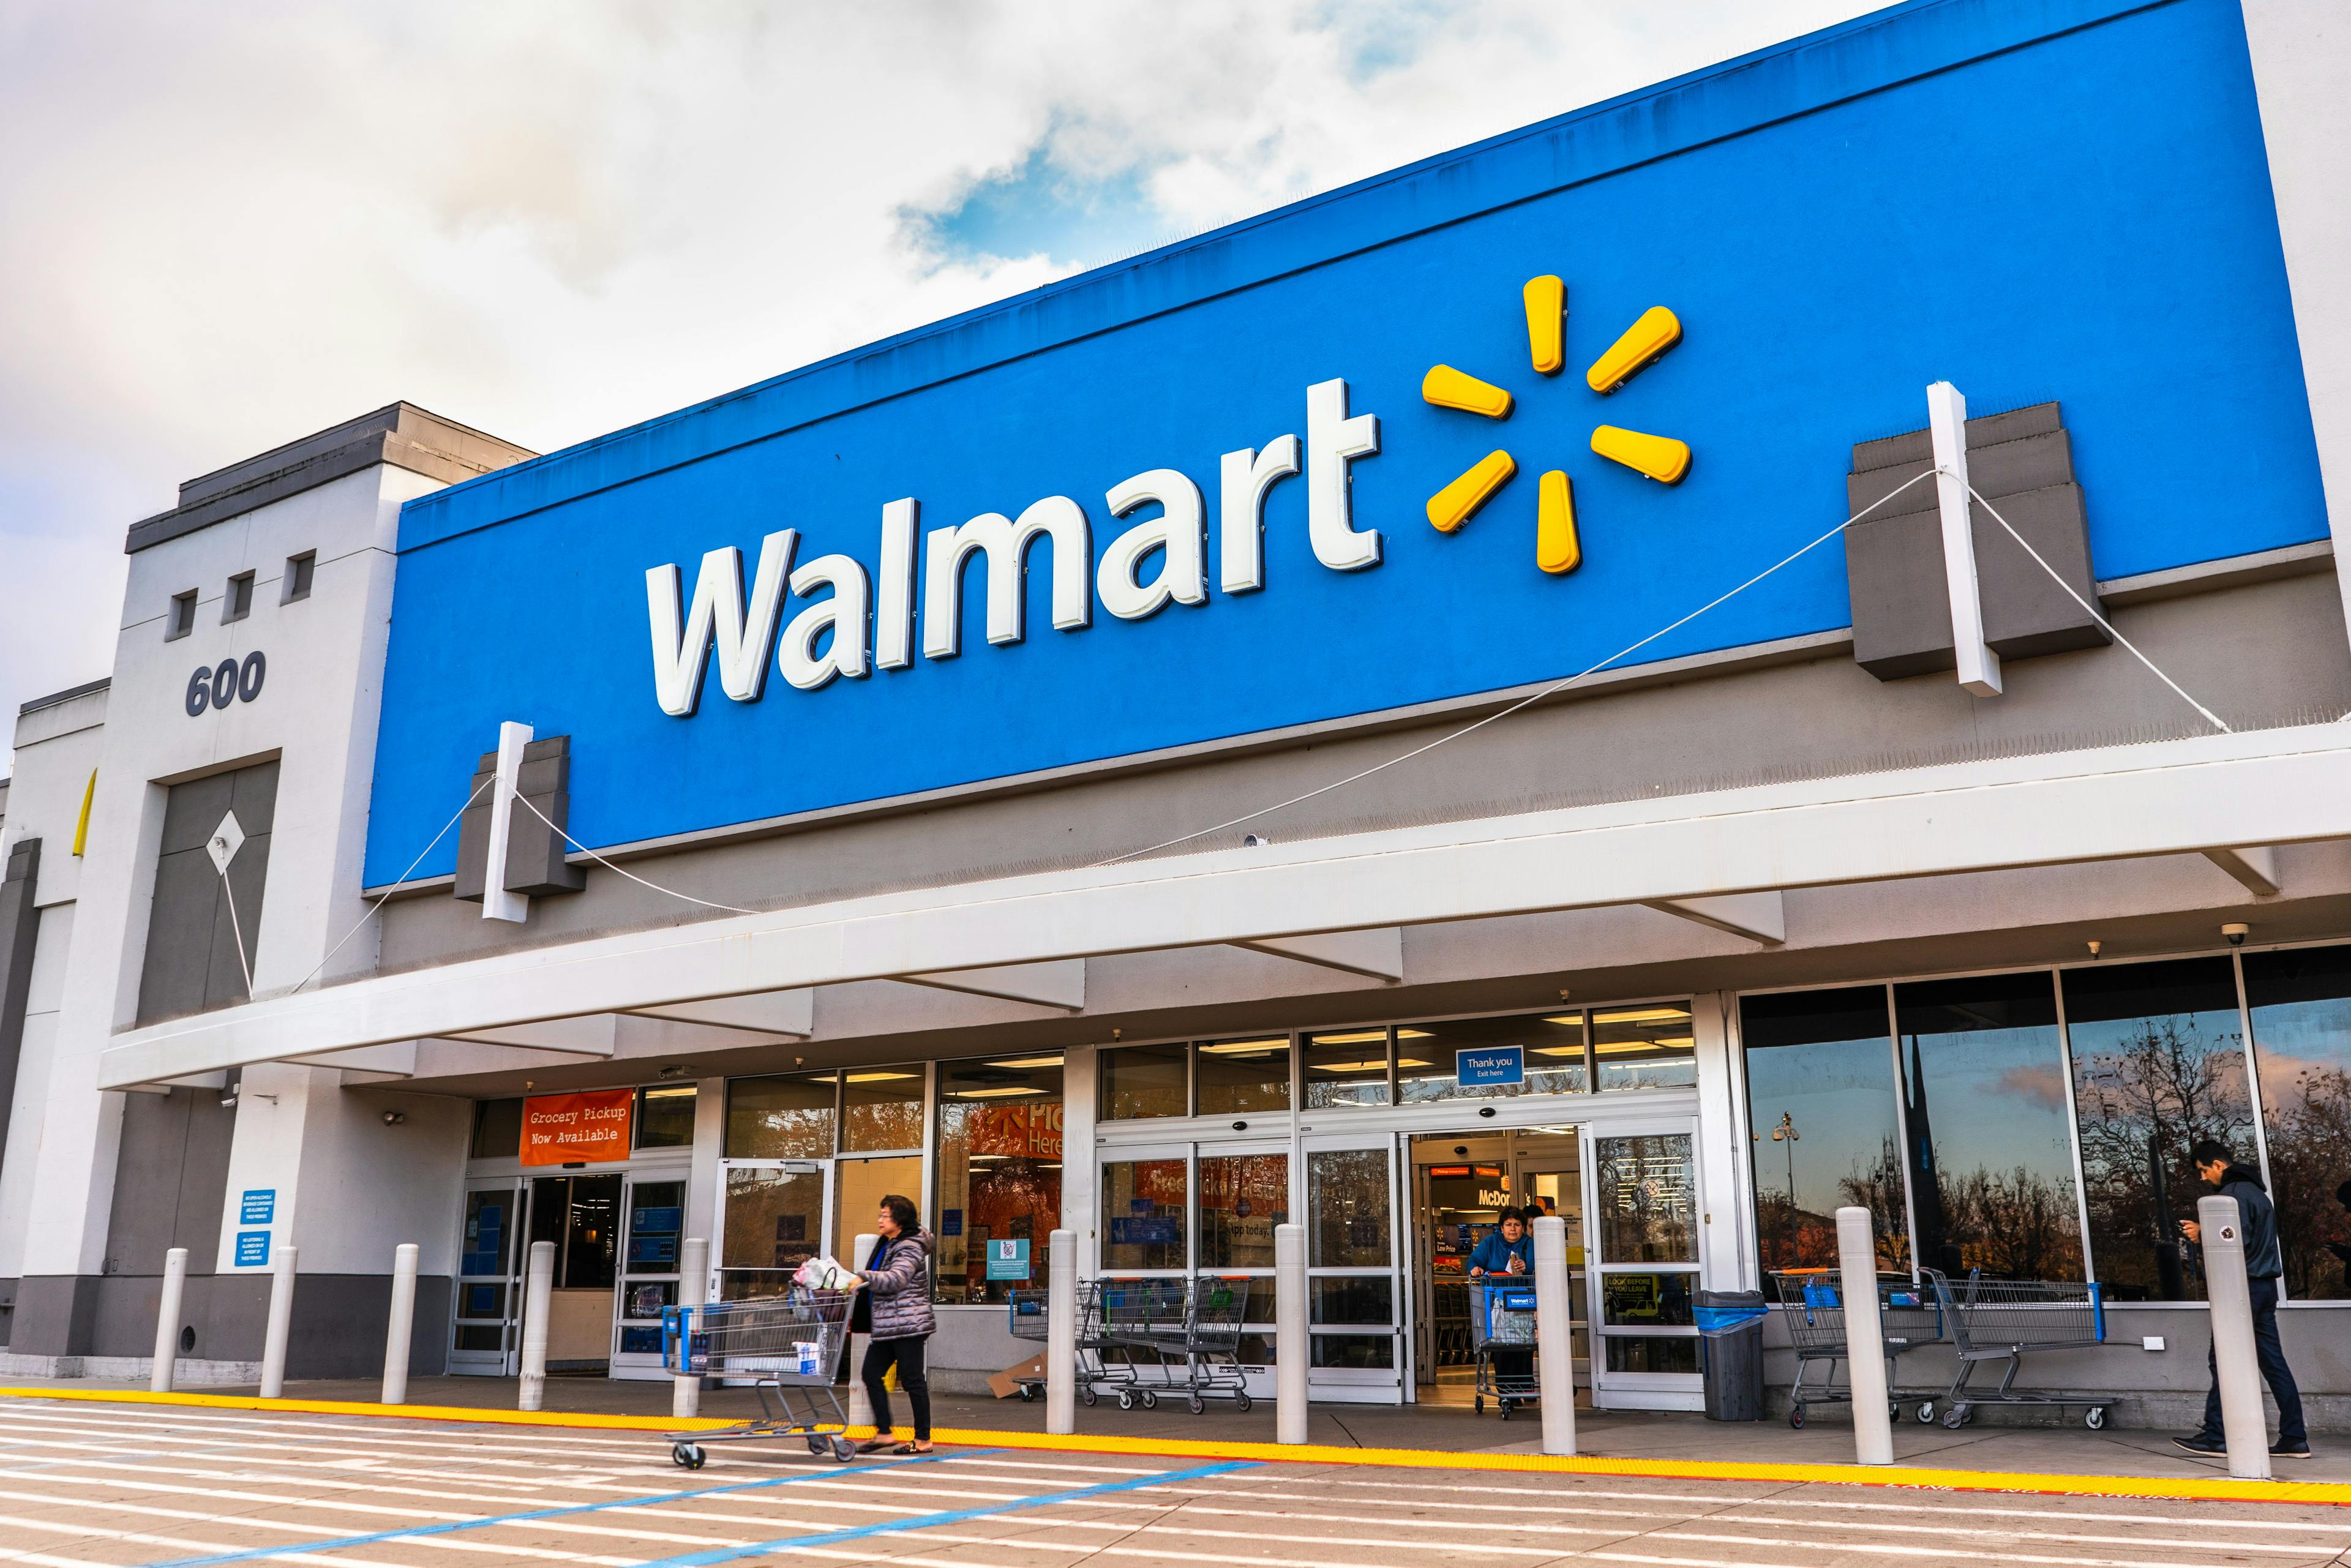 CenterWell to take over shuttered Walmart Health spaces: ©SundryPhotography - stock.adobe.com